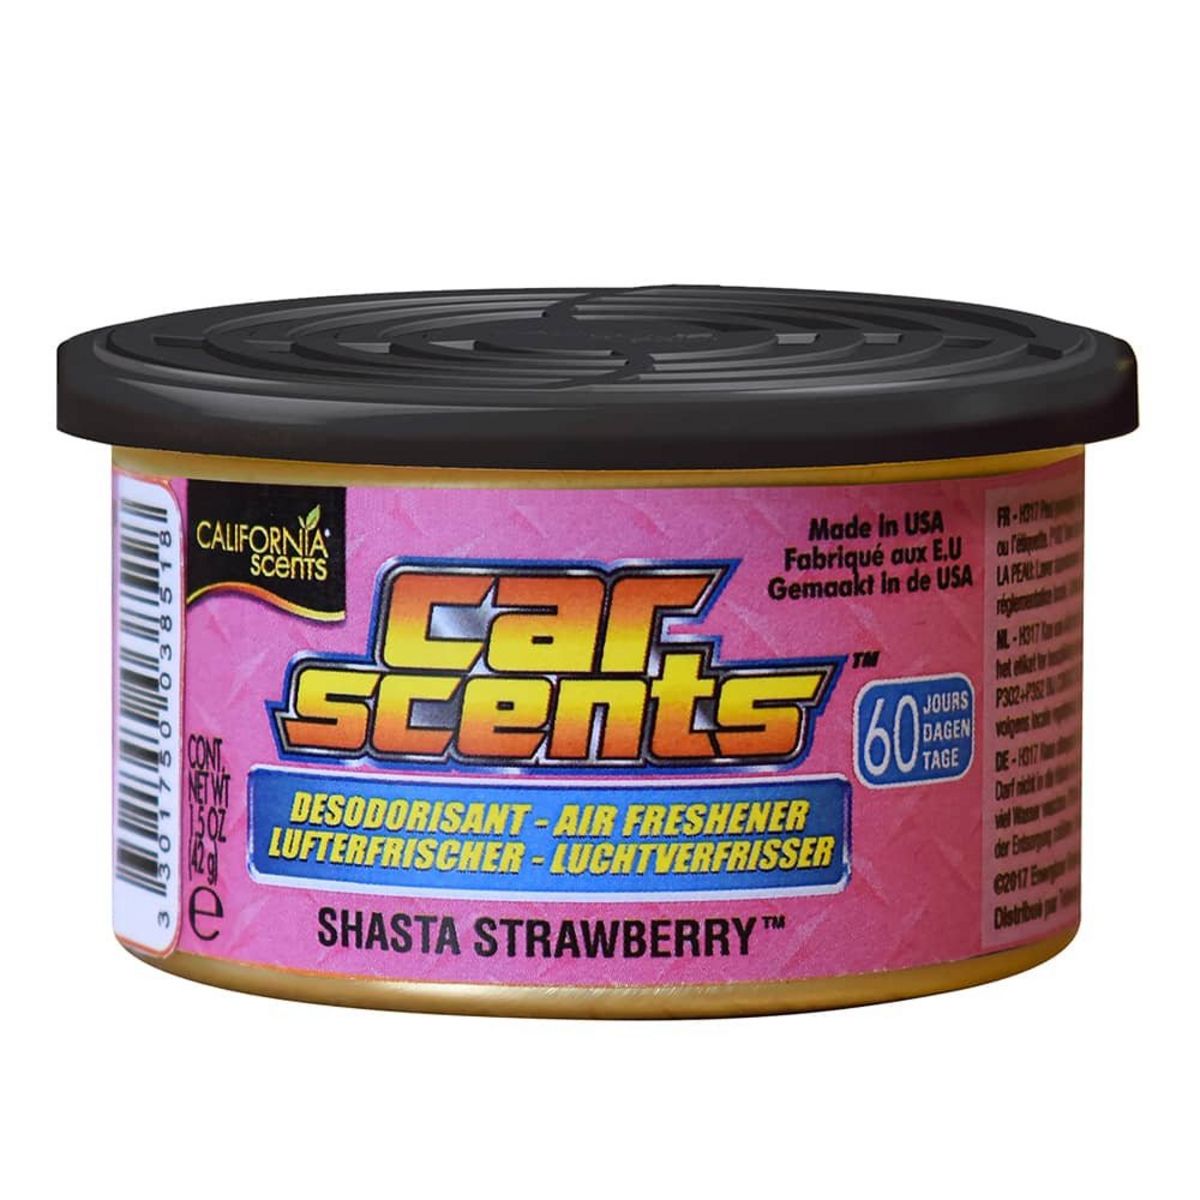 CAR SCENTS CAR SCENTS SHASTA STRAWBERRY pas cher 